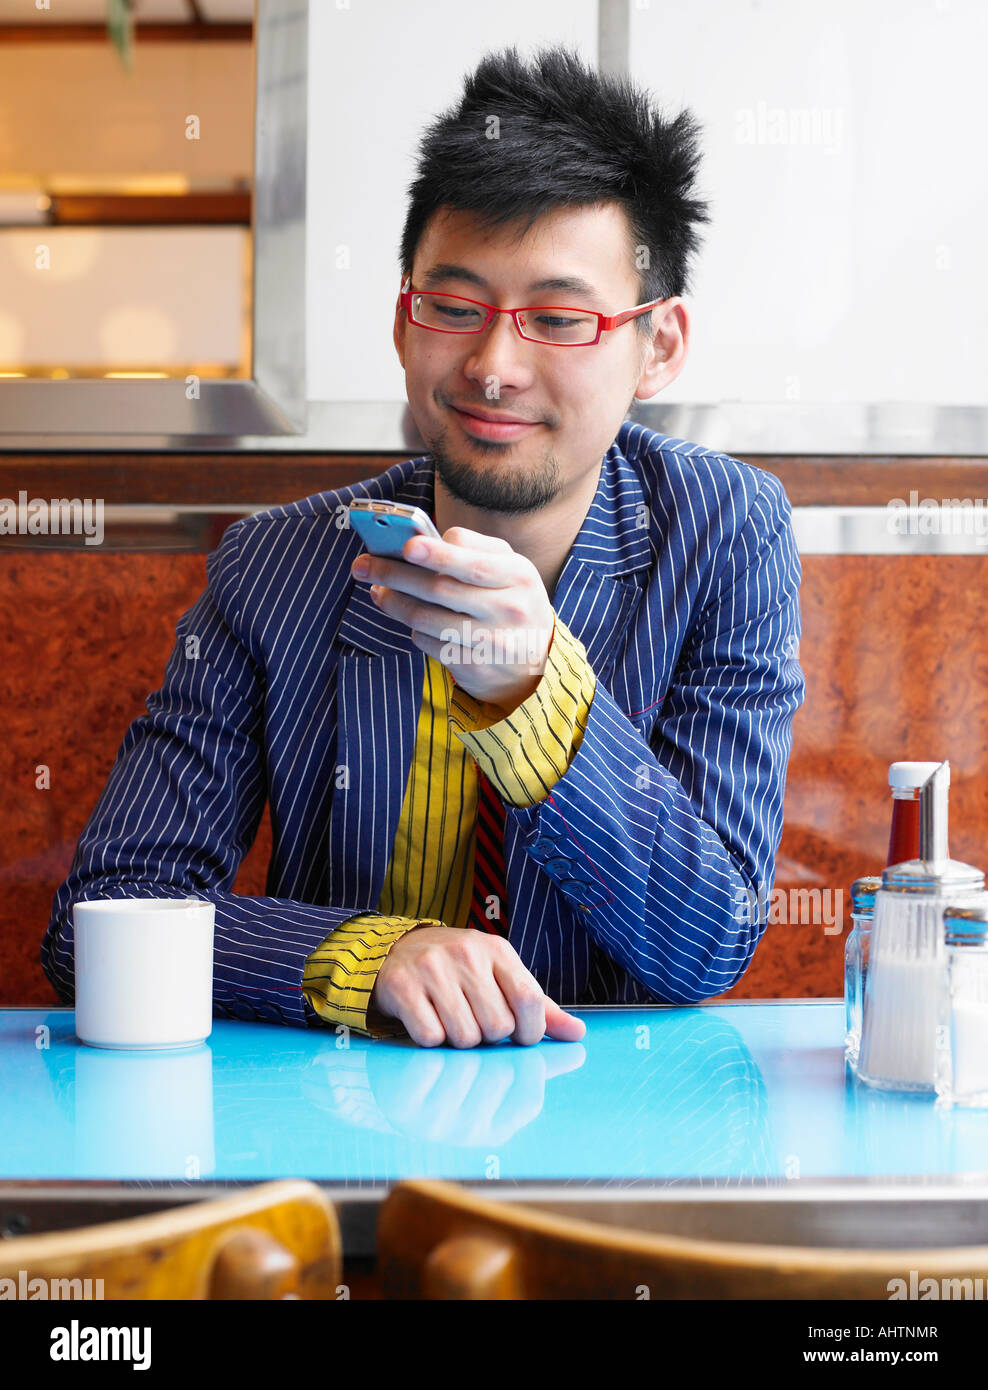 Young man sitting in cafe using mobile phone, smiling Stock Photo